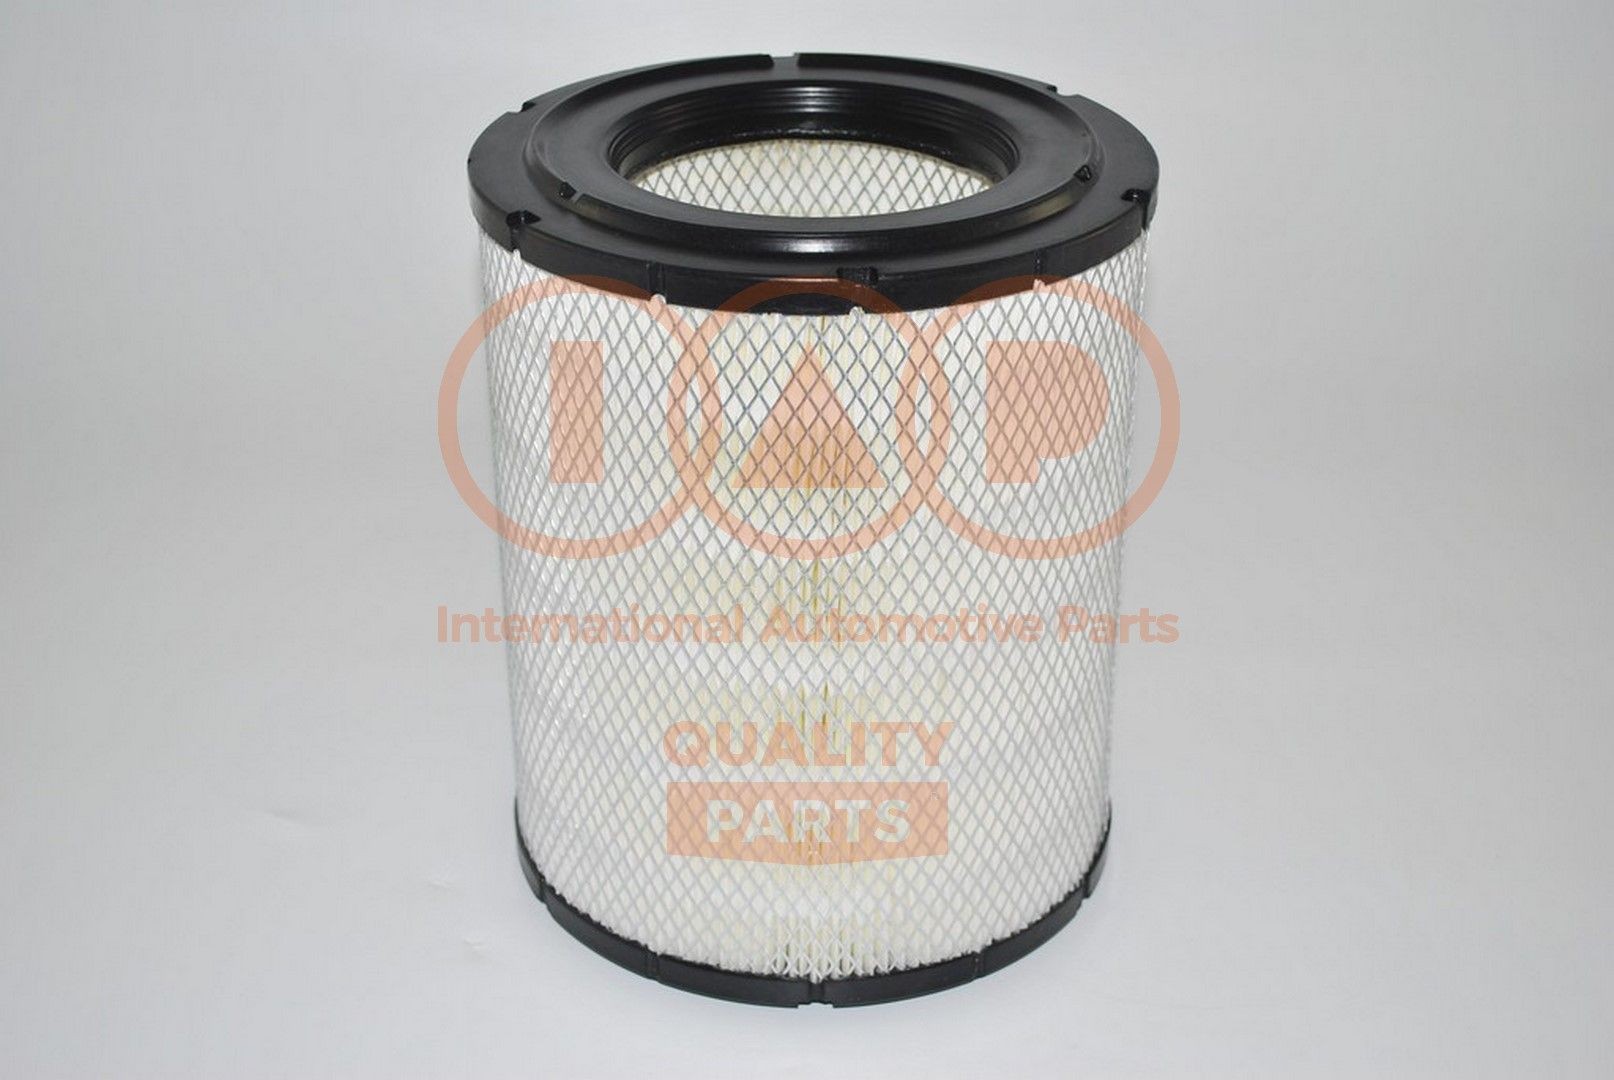 IAP QUALITY PARTS 290mm, 230mm, Filter Insert Height: 290mm Engine air filter 121-09093 buy